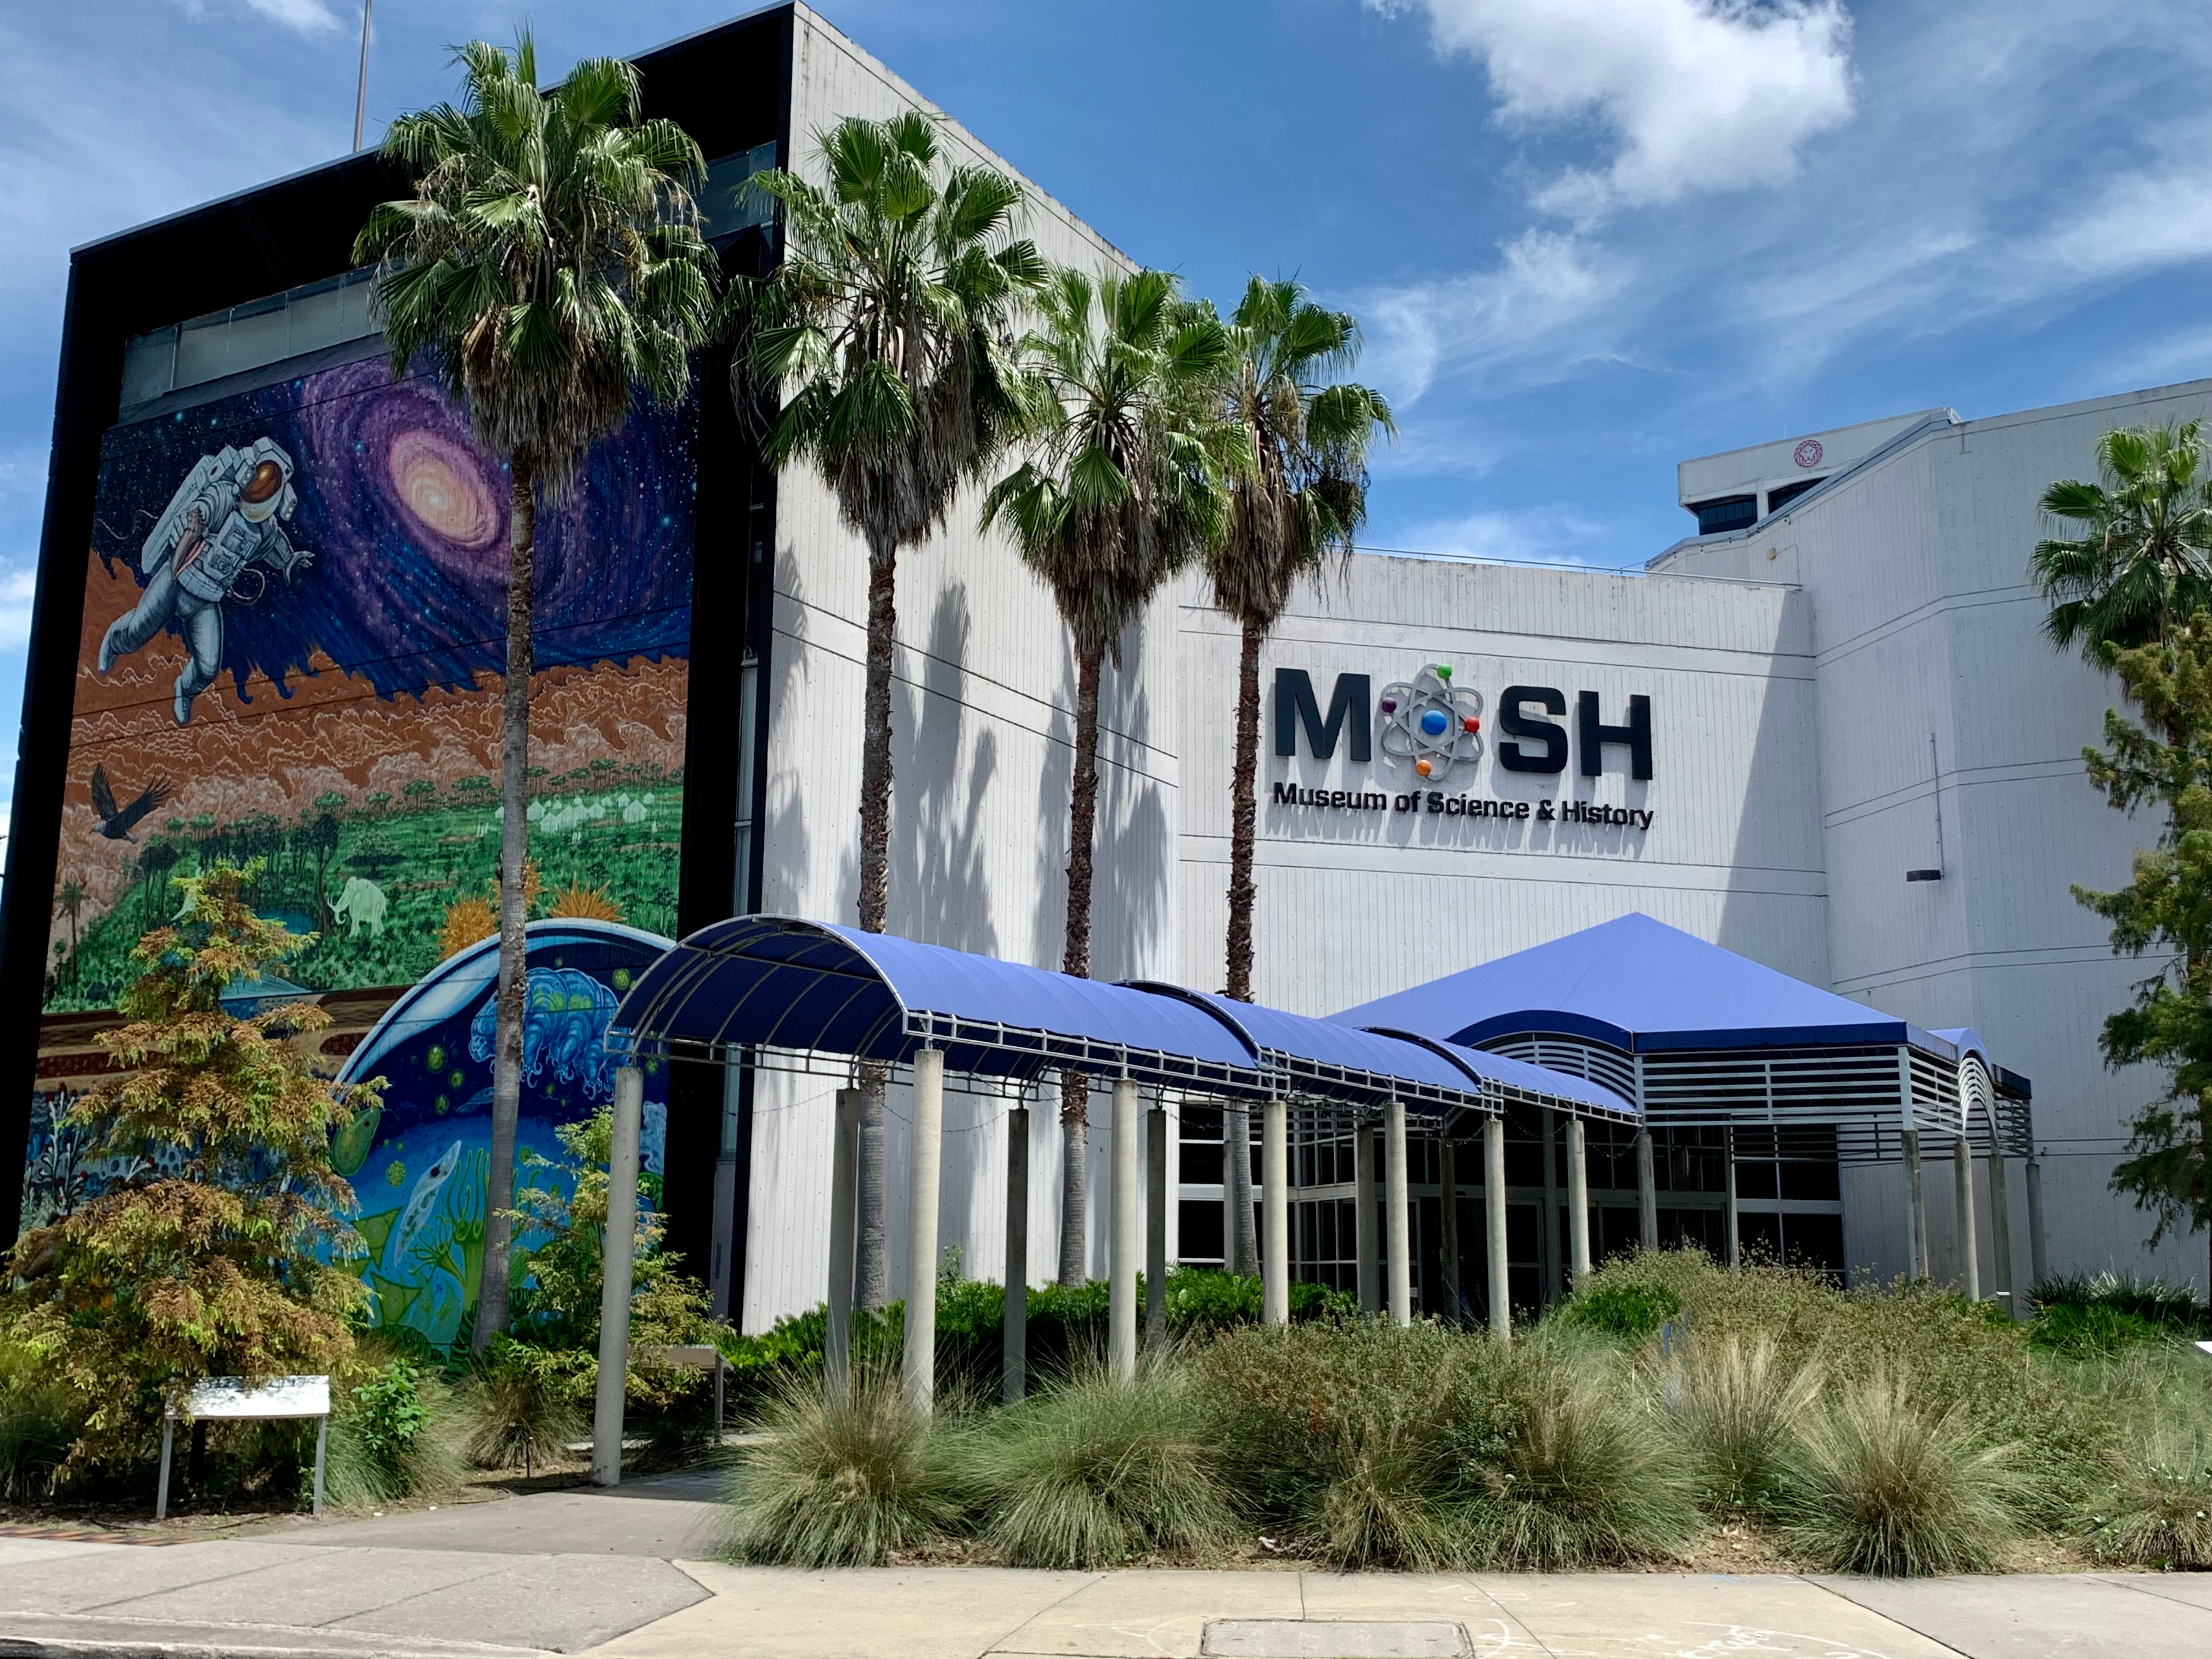 Exterior shot of the MOSH Museum of Science & History. There is a gray building with a covered walkway. To the left of the entrance are palm trees. In front of the entrance is a small dessert garden. The left side of the building has a colorful mural of an astronaut in a space suit floating through space. Below it the mural shows depicts other ecosystems.